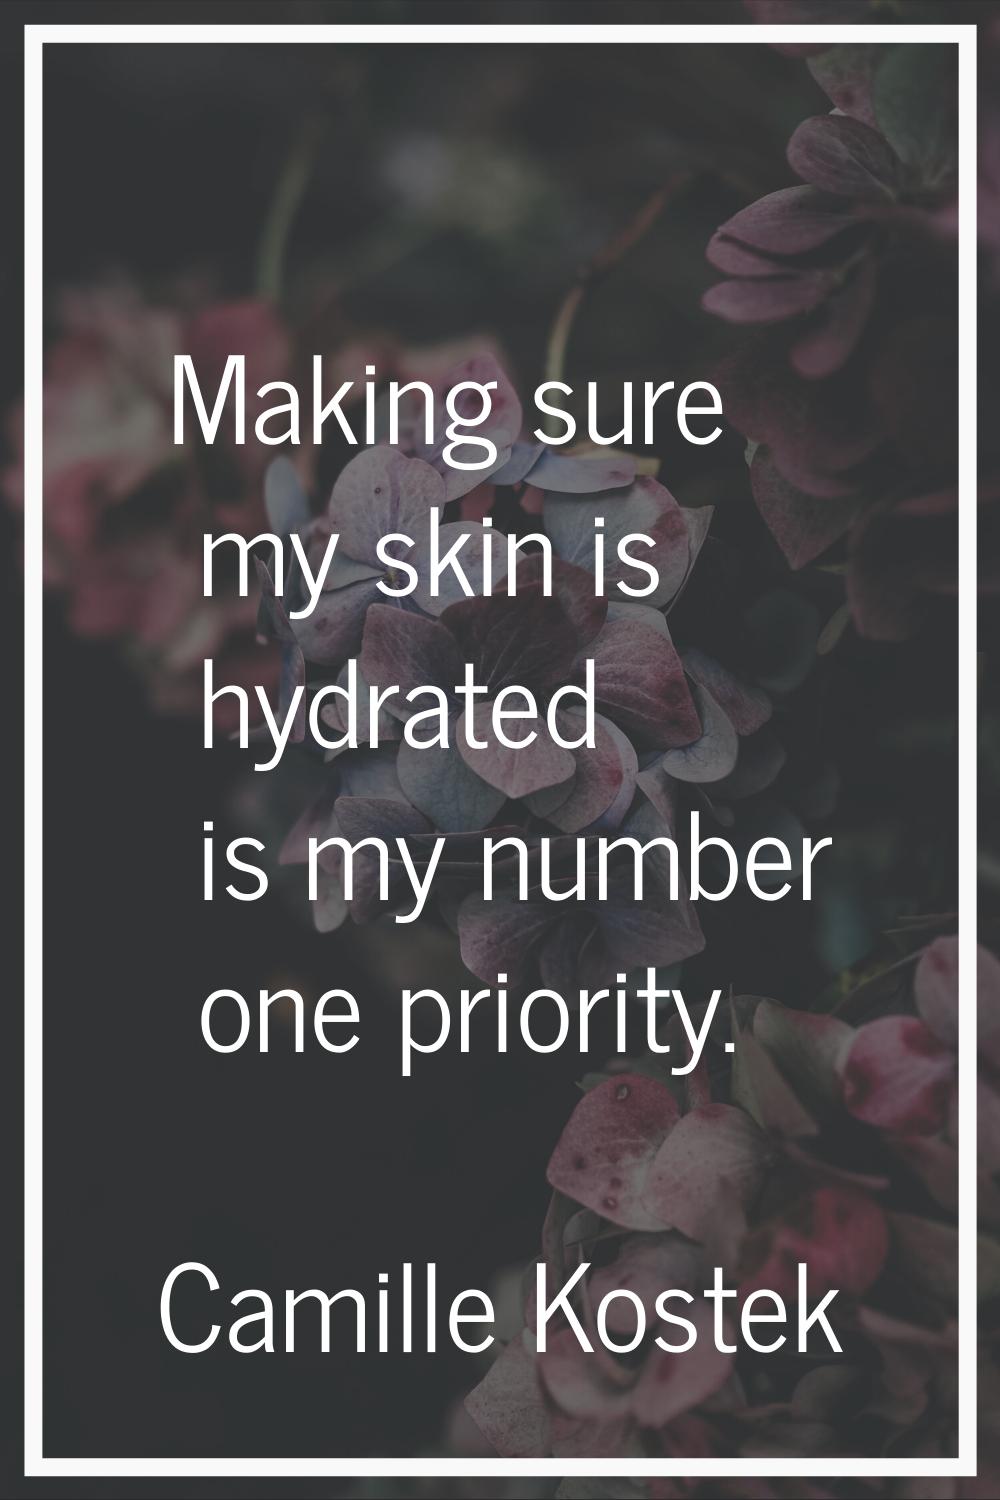 Making sure my skin is hydrated is my number one priority.